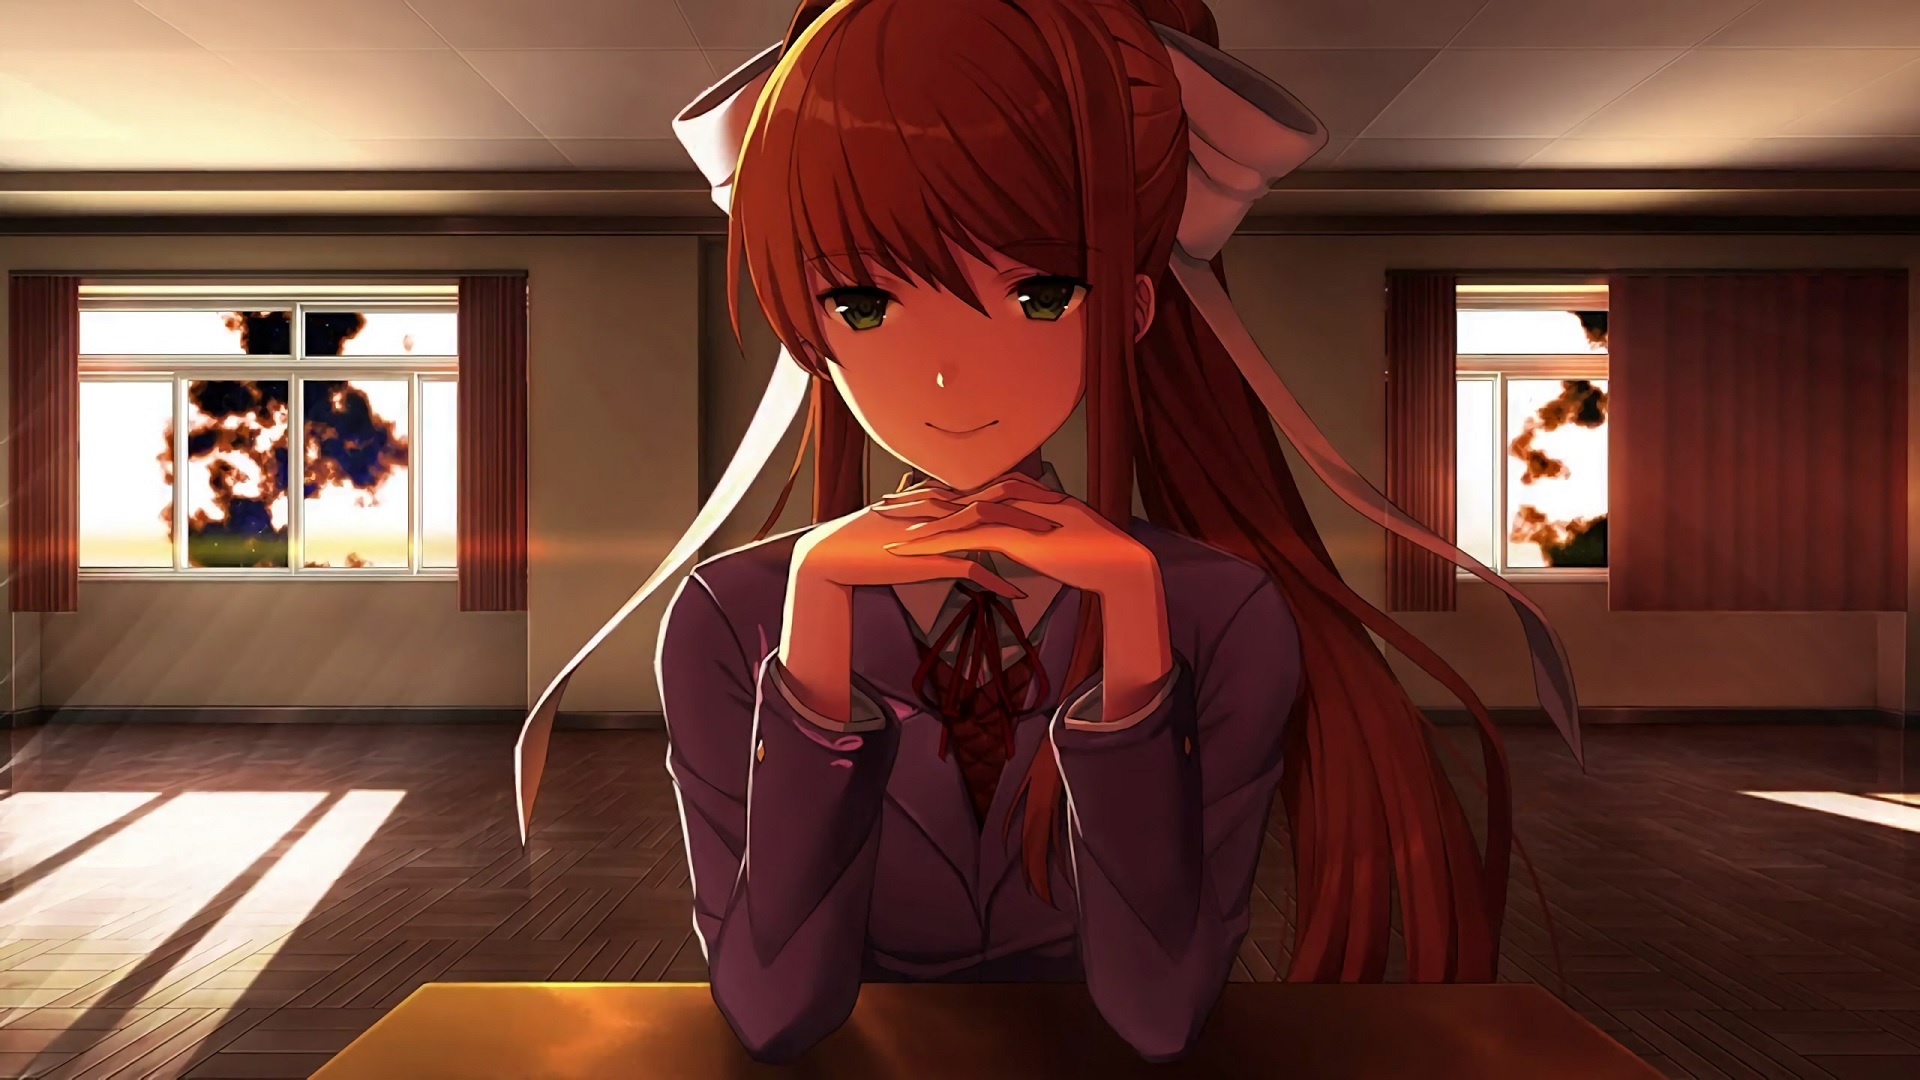 SO MUCH LOVE!  Monika After Story (Valentines Day 2022) 